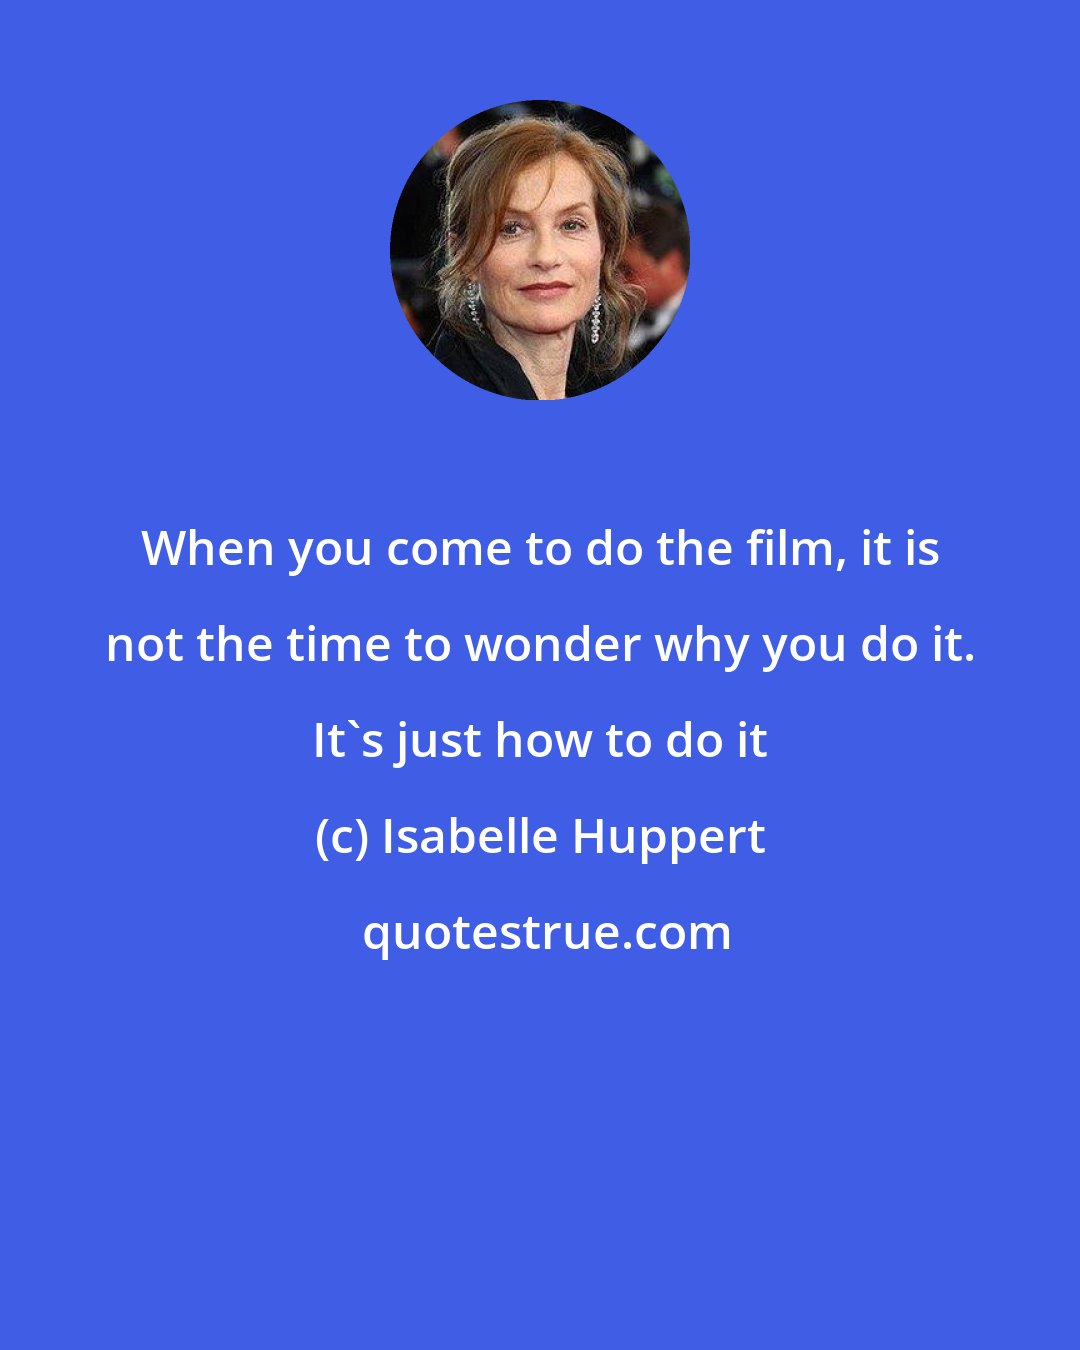 Isabelle Huppert: When you come to do the film, it is not the time to wonder why you do it. It's just how to do it